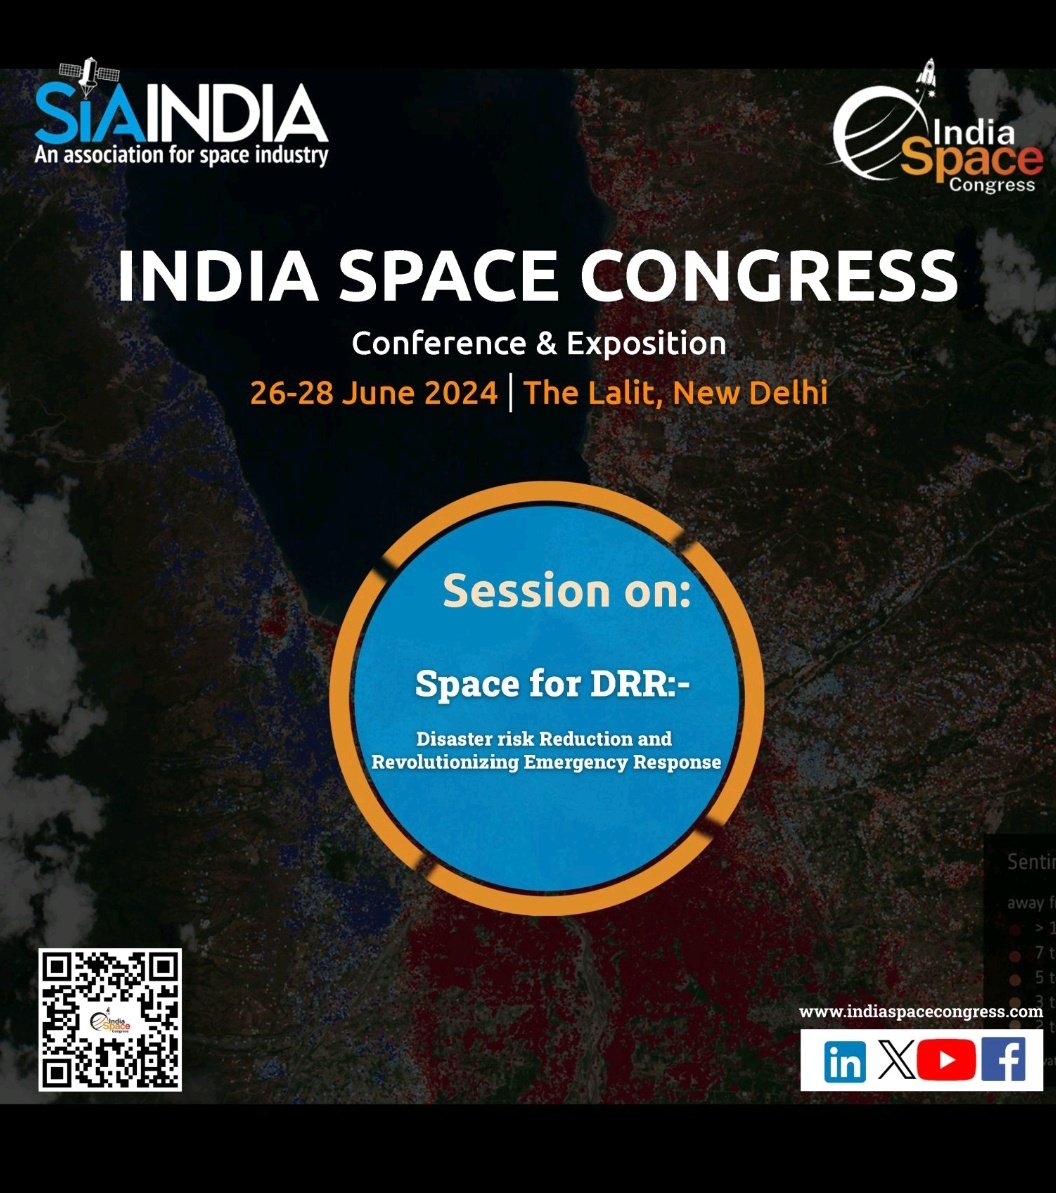 Join us at the India Space Congress from June 26th-28th, 2024, at The Lalit, New Delhi, to delve into a session on 'Space for DRR: Disaster Risk Reduction and revolutionizing Emergency Response.' Visit: indiaspacecongress.com #emergency #response #DRR